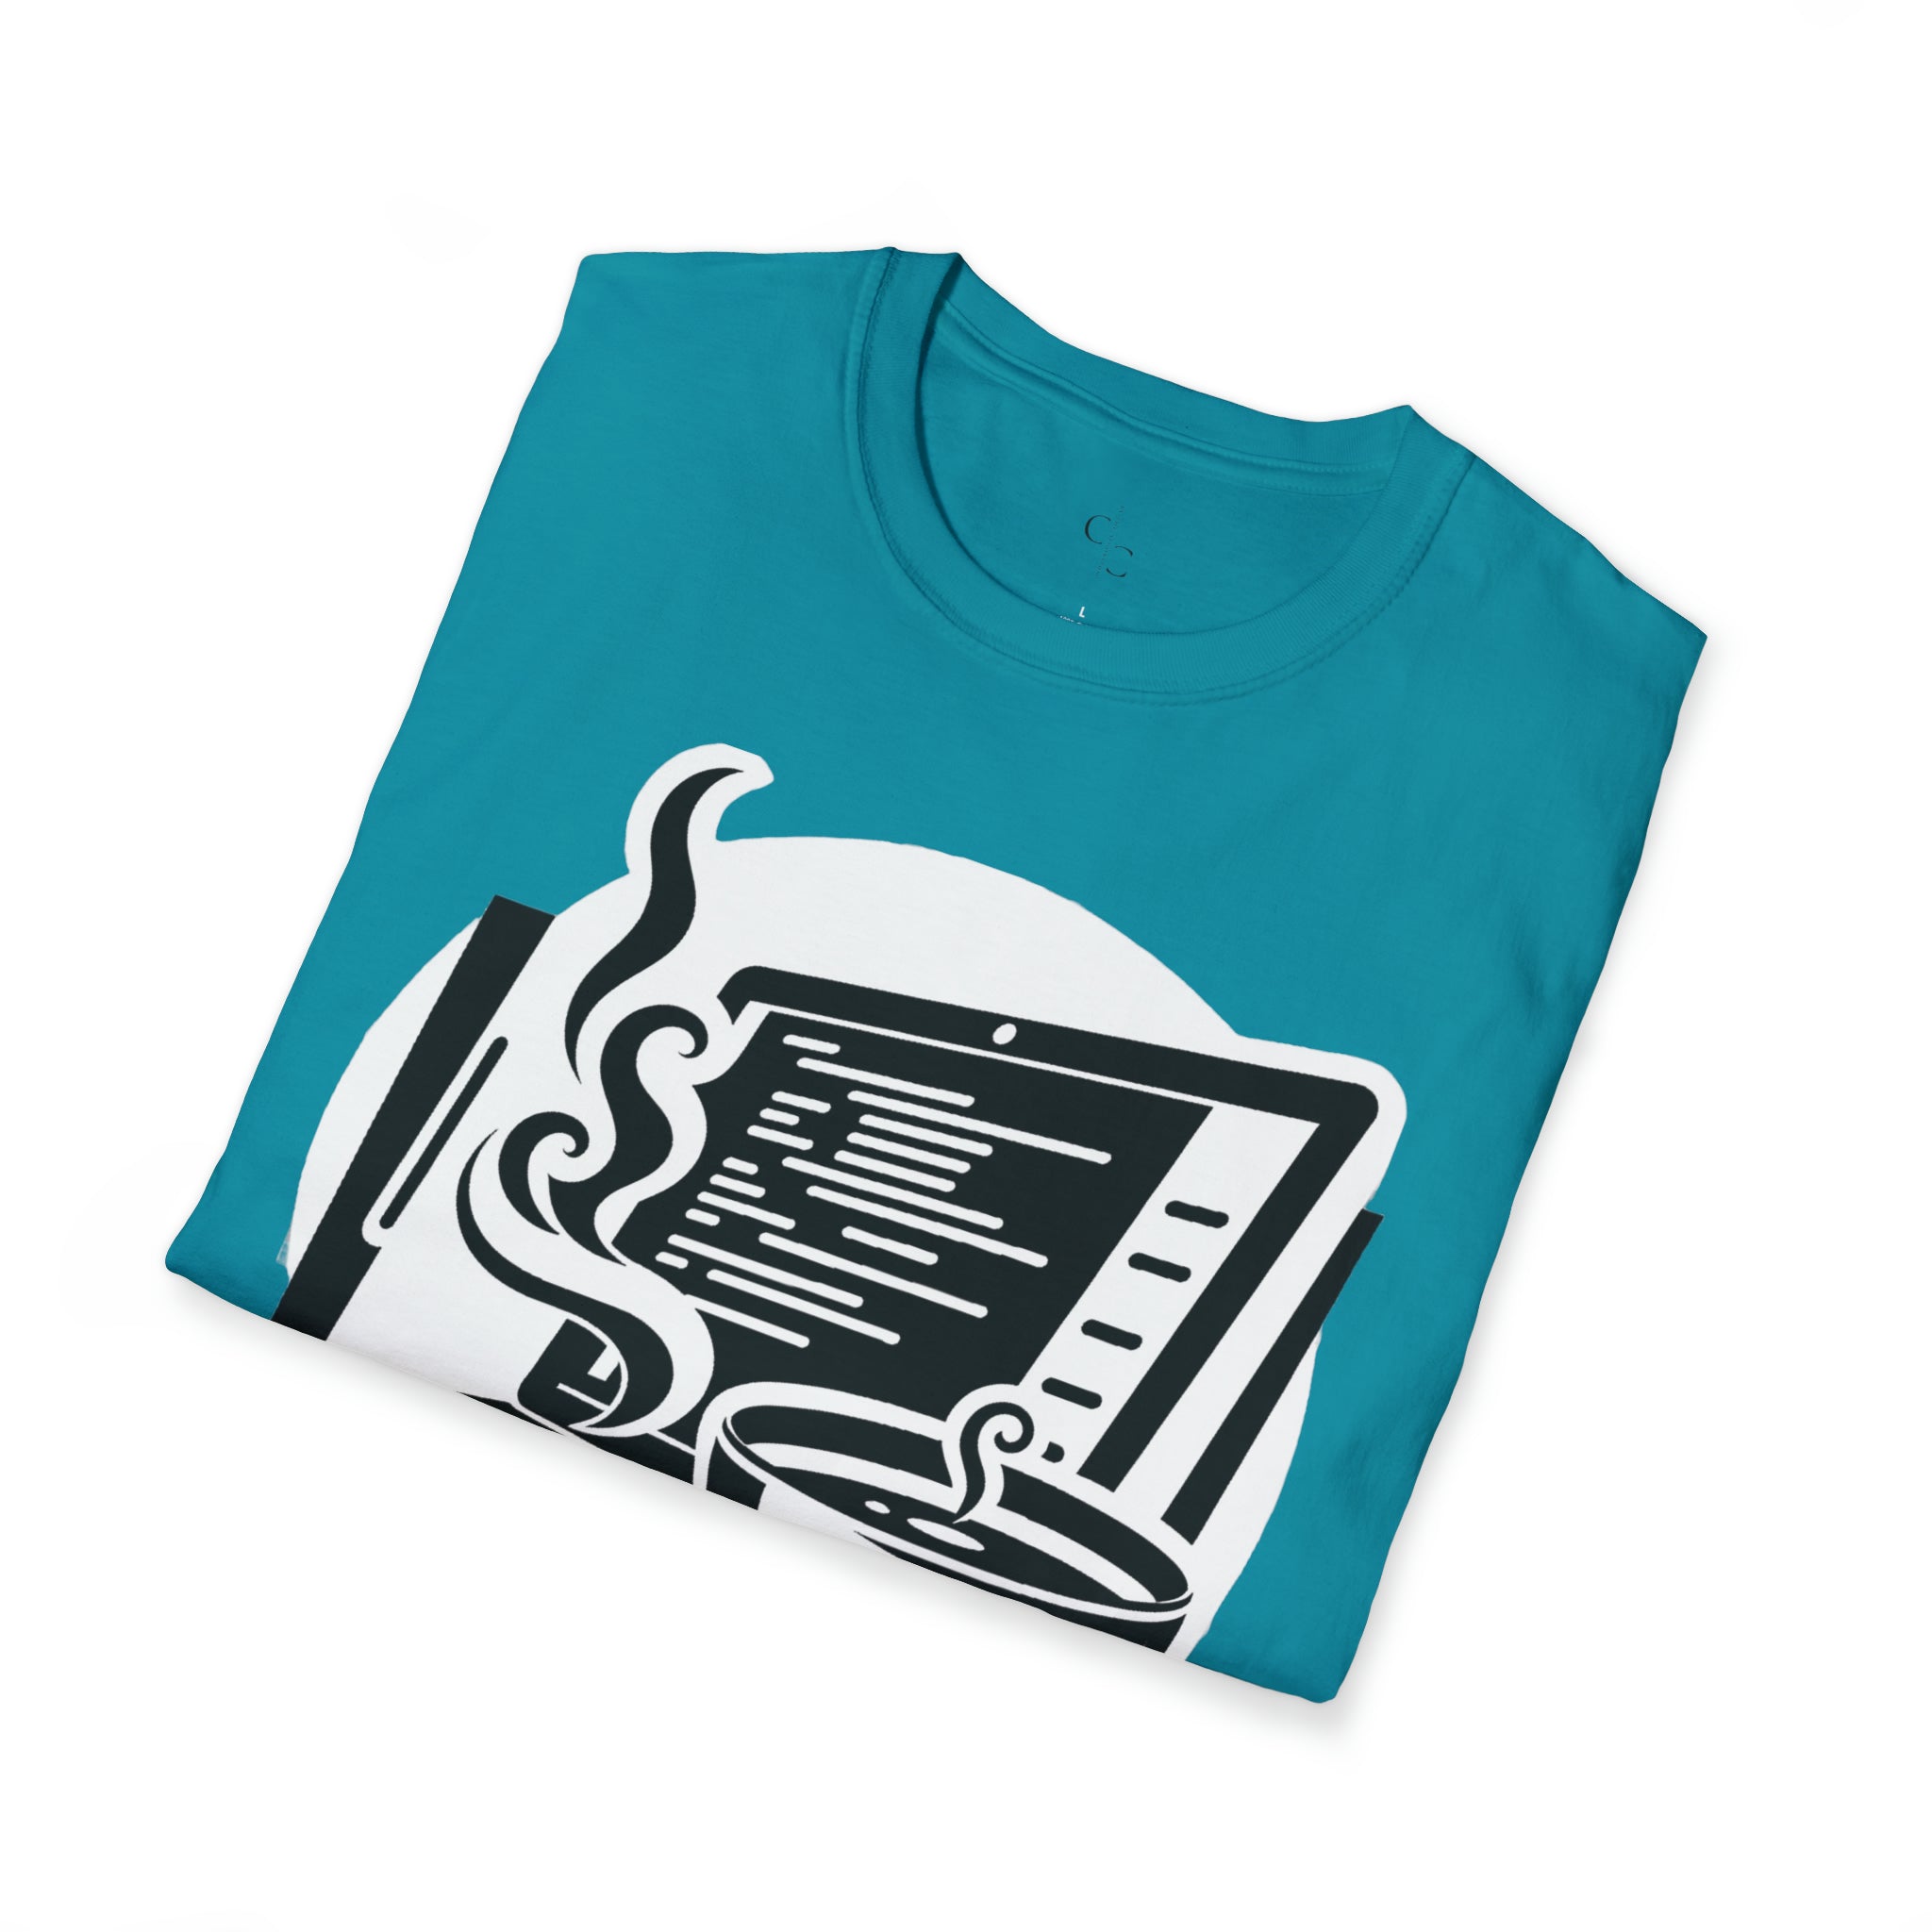 A Taste of Chai While Coding is The Just Best Unisex Softstyle T-Shirt